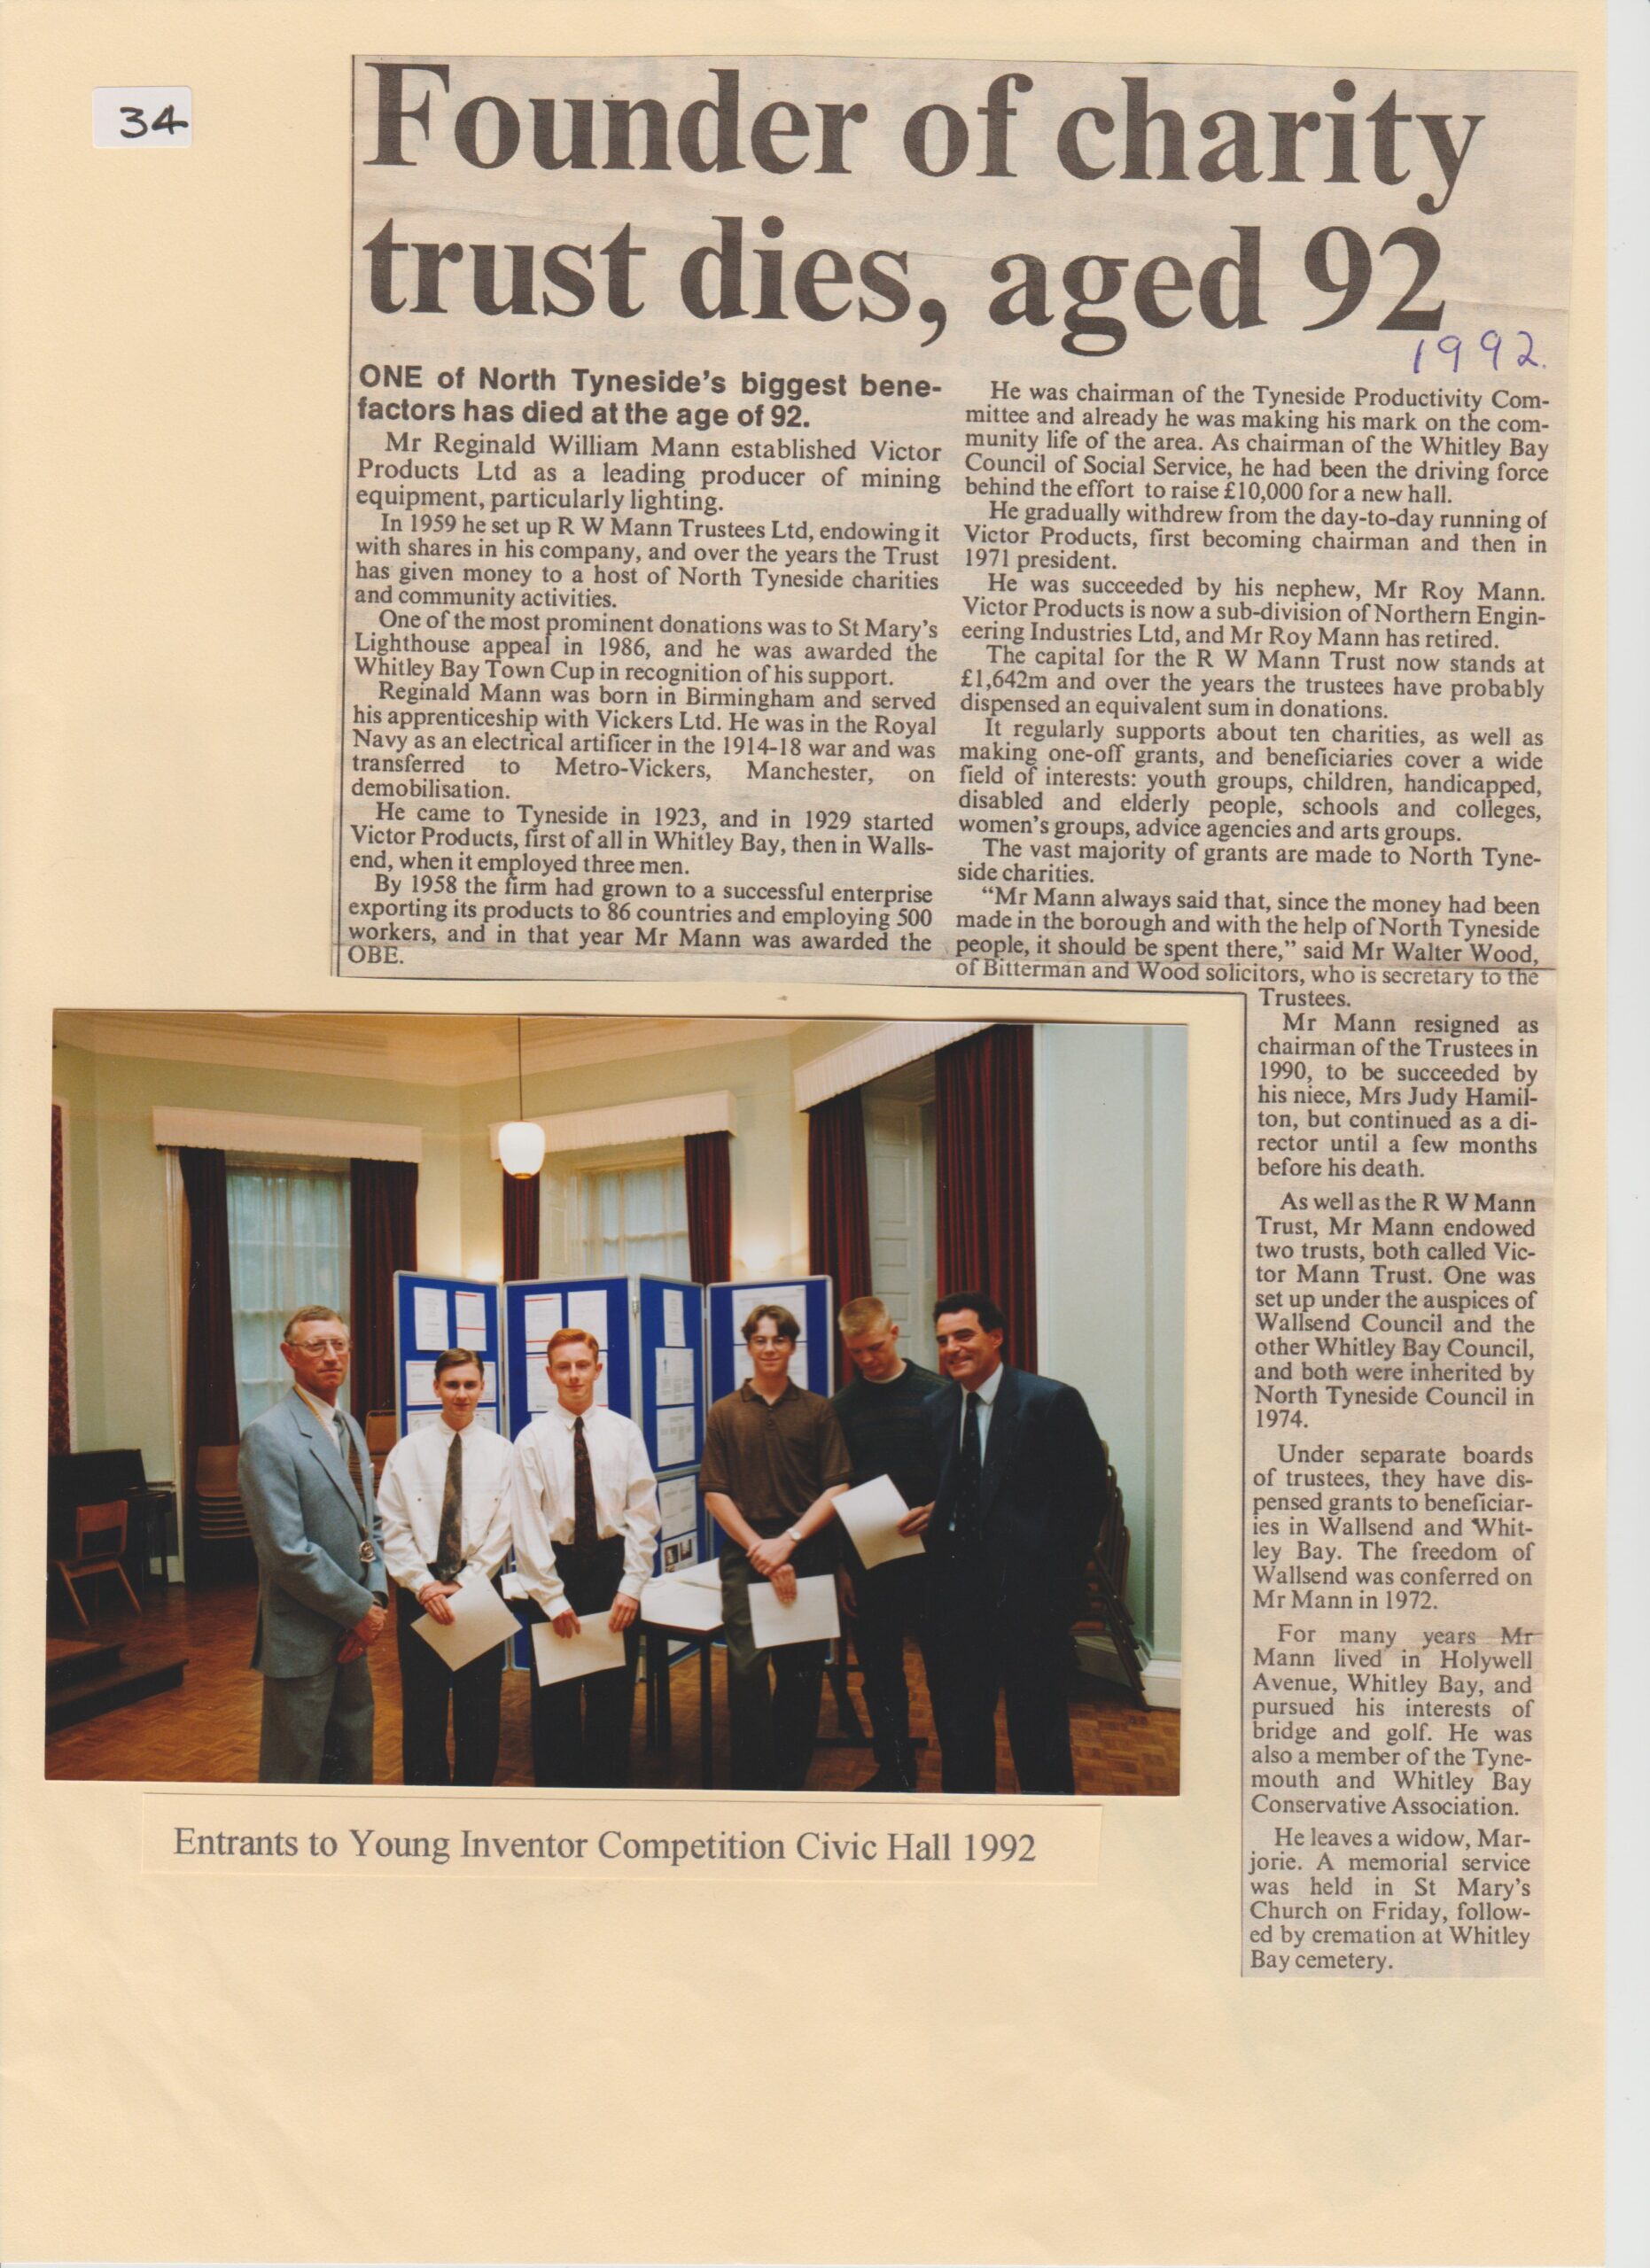 Entrants to young Inventor Competition and Article on death of William Mann both 1992